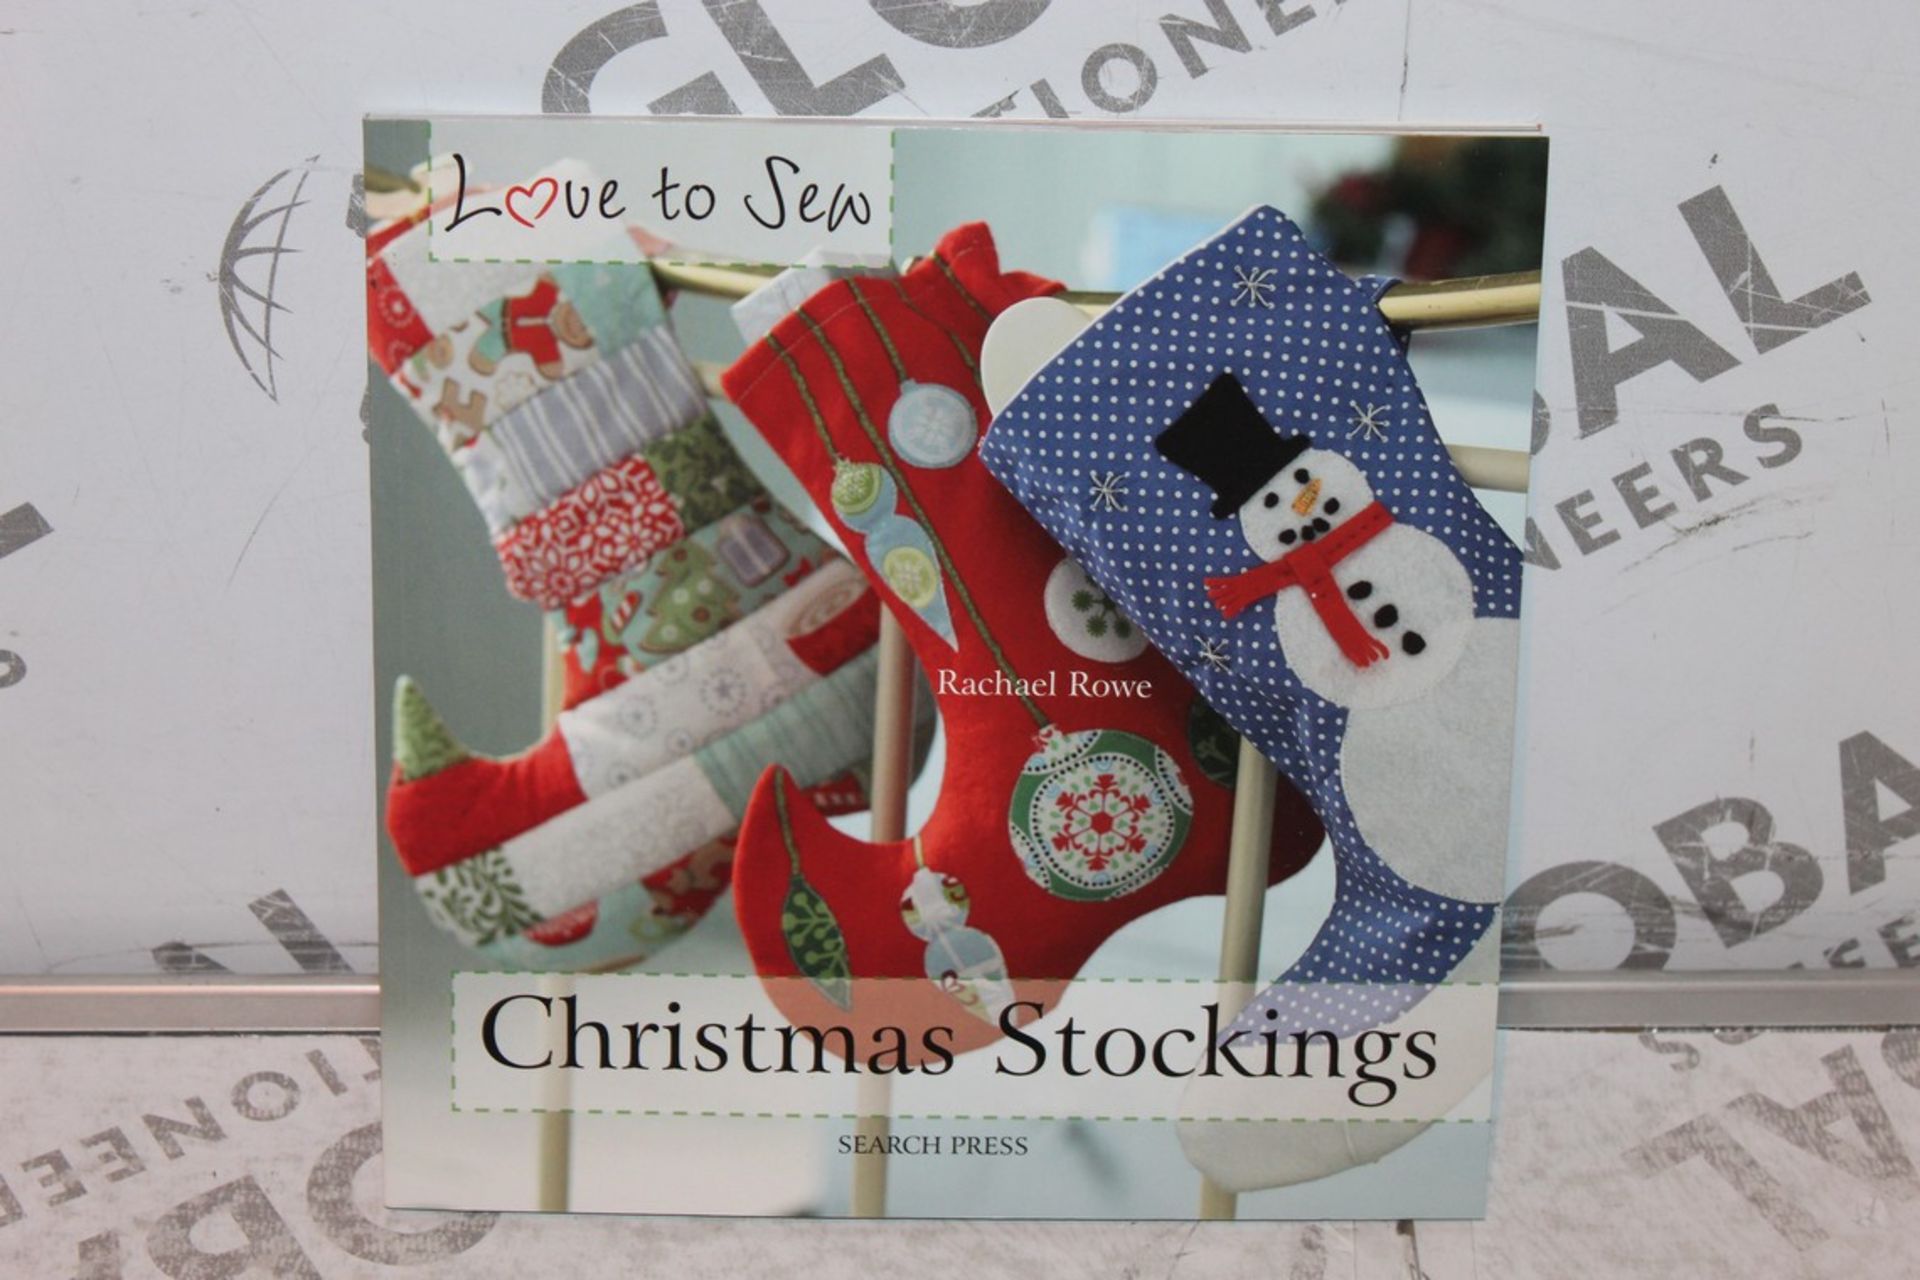 Lot to Contain 35 Brand-New Love to Sew, Christmas Stockings, Knitting Guides, (Public Viewings